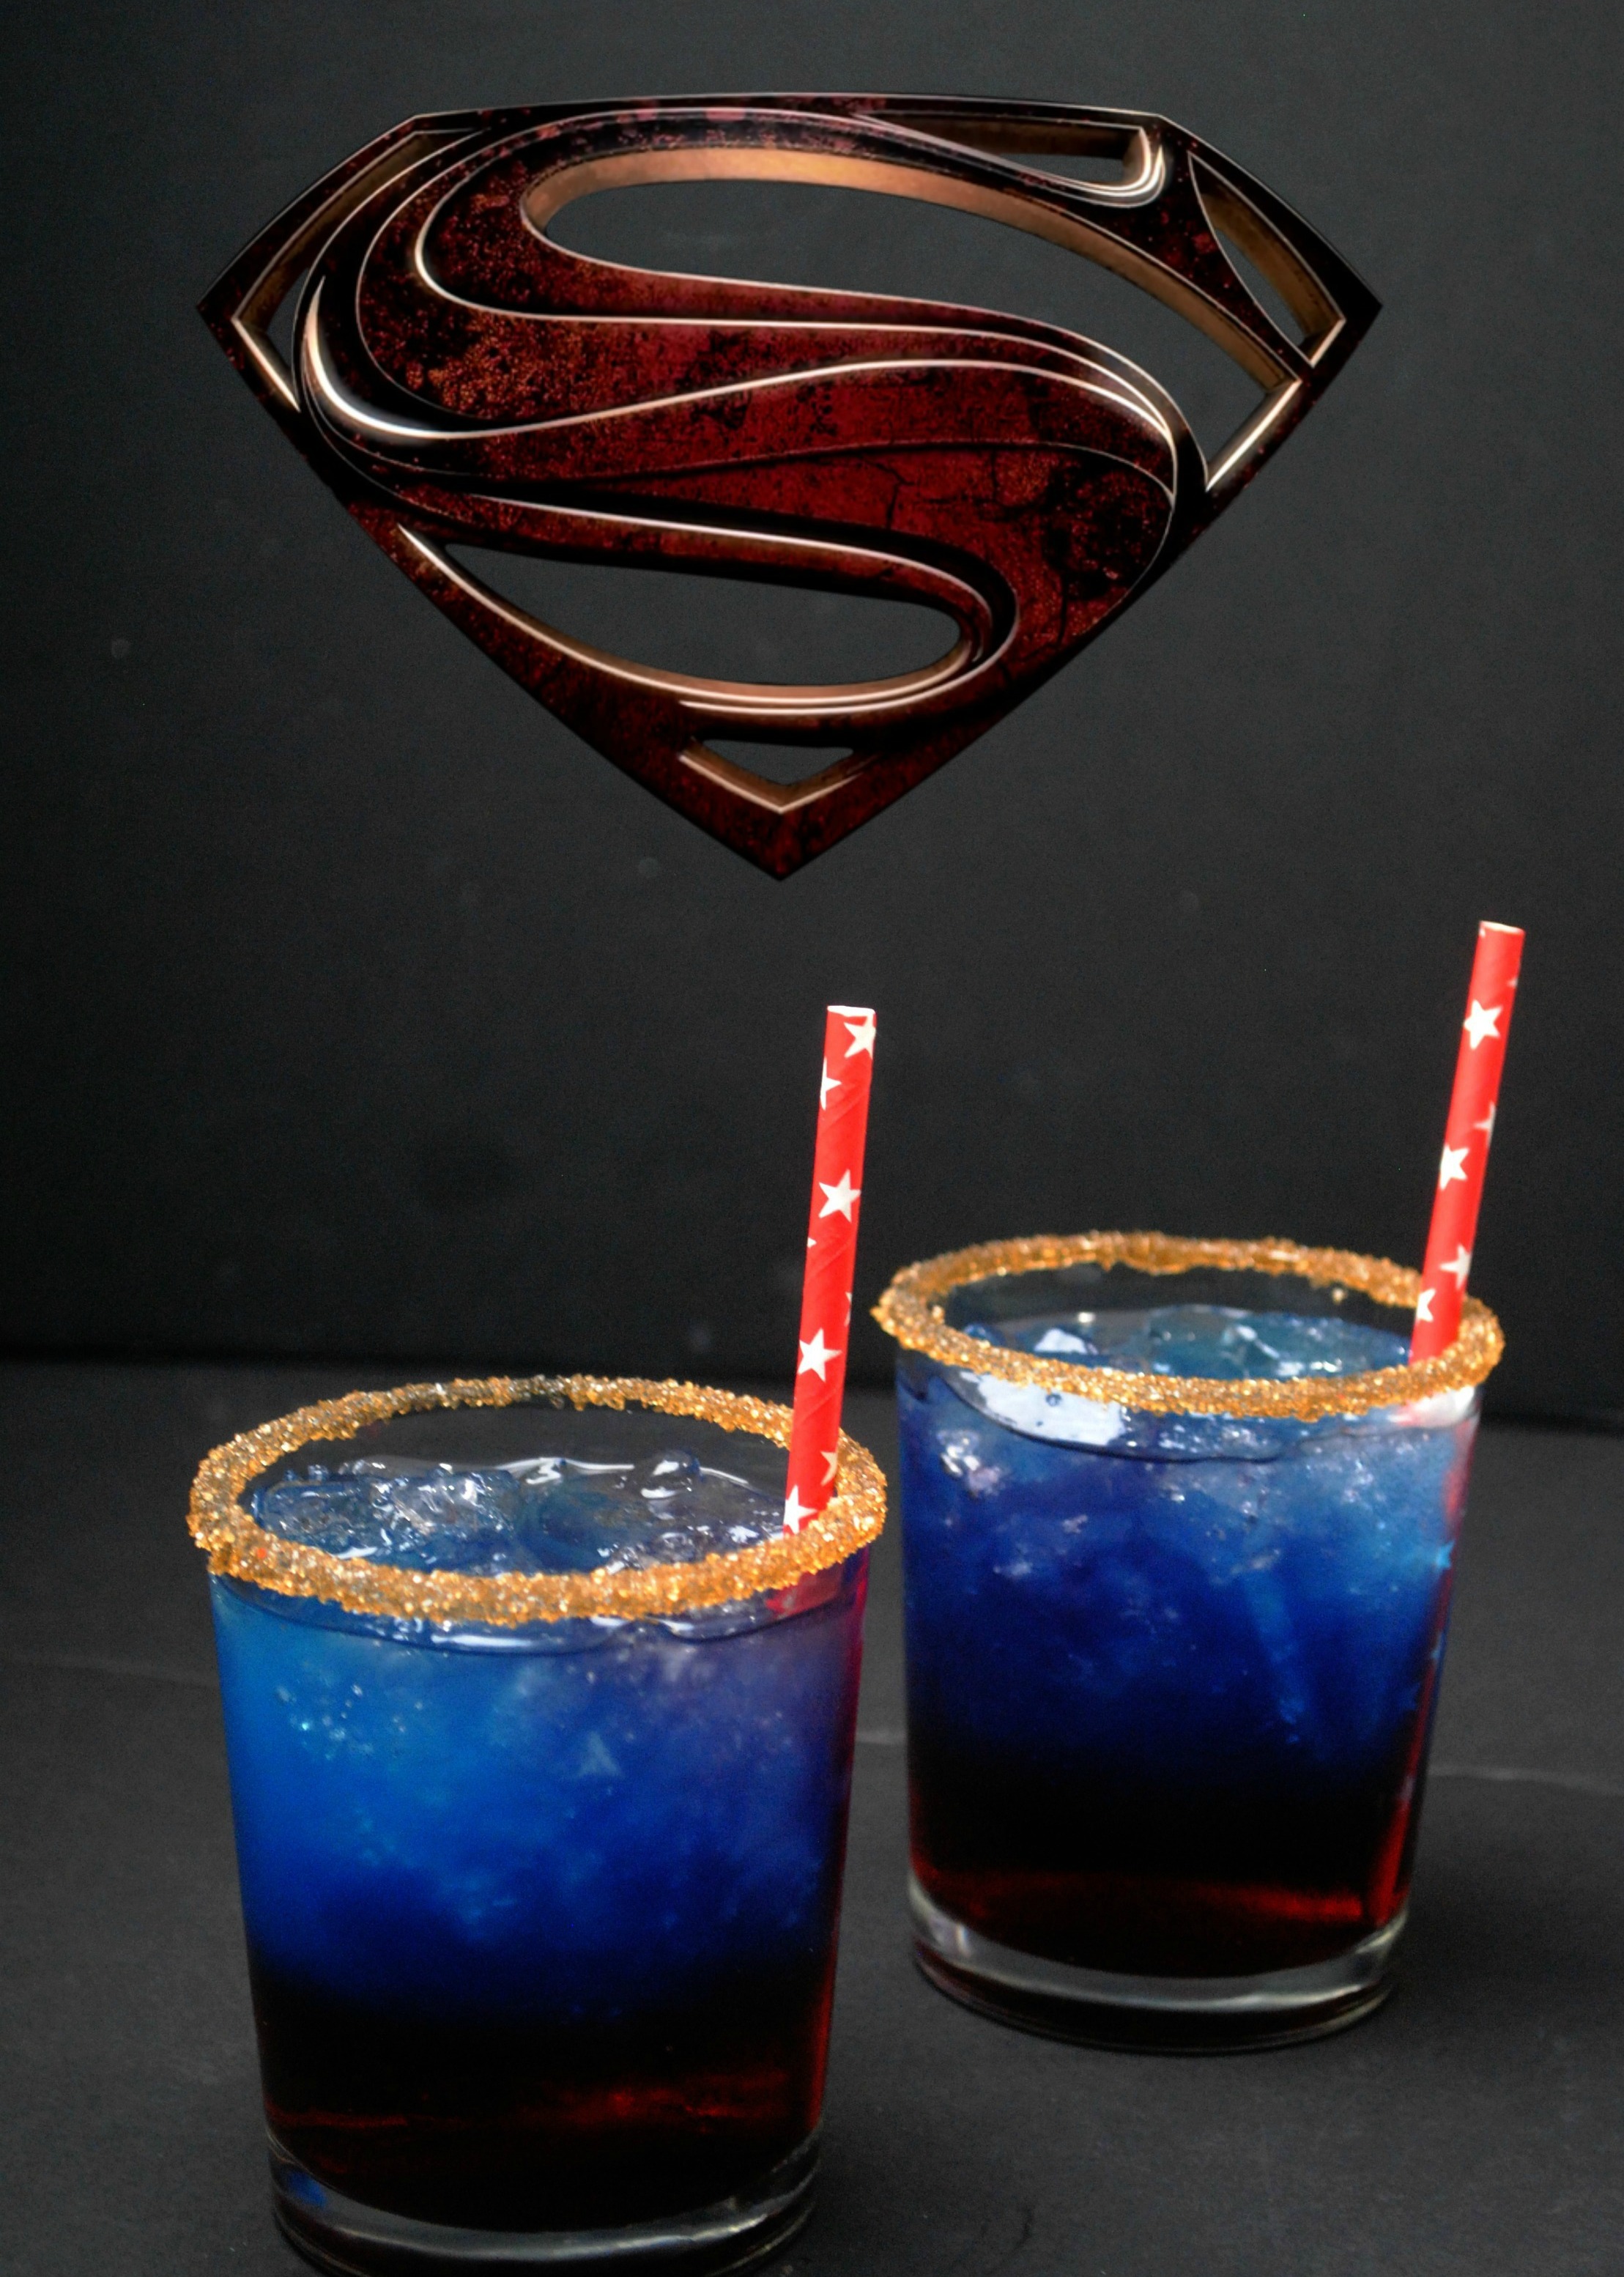 Black Superman Drink - A Strong Shot That Is Not For The Weak